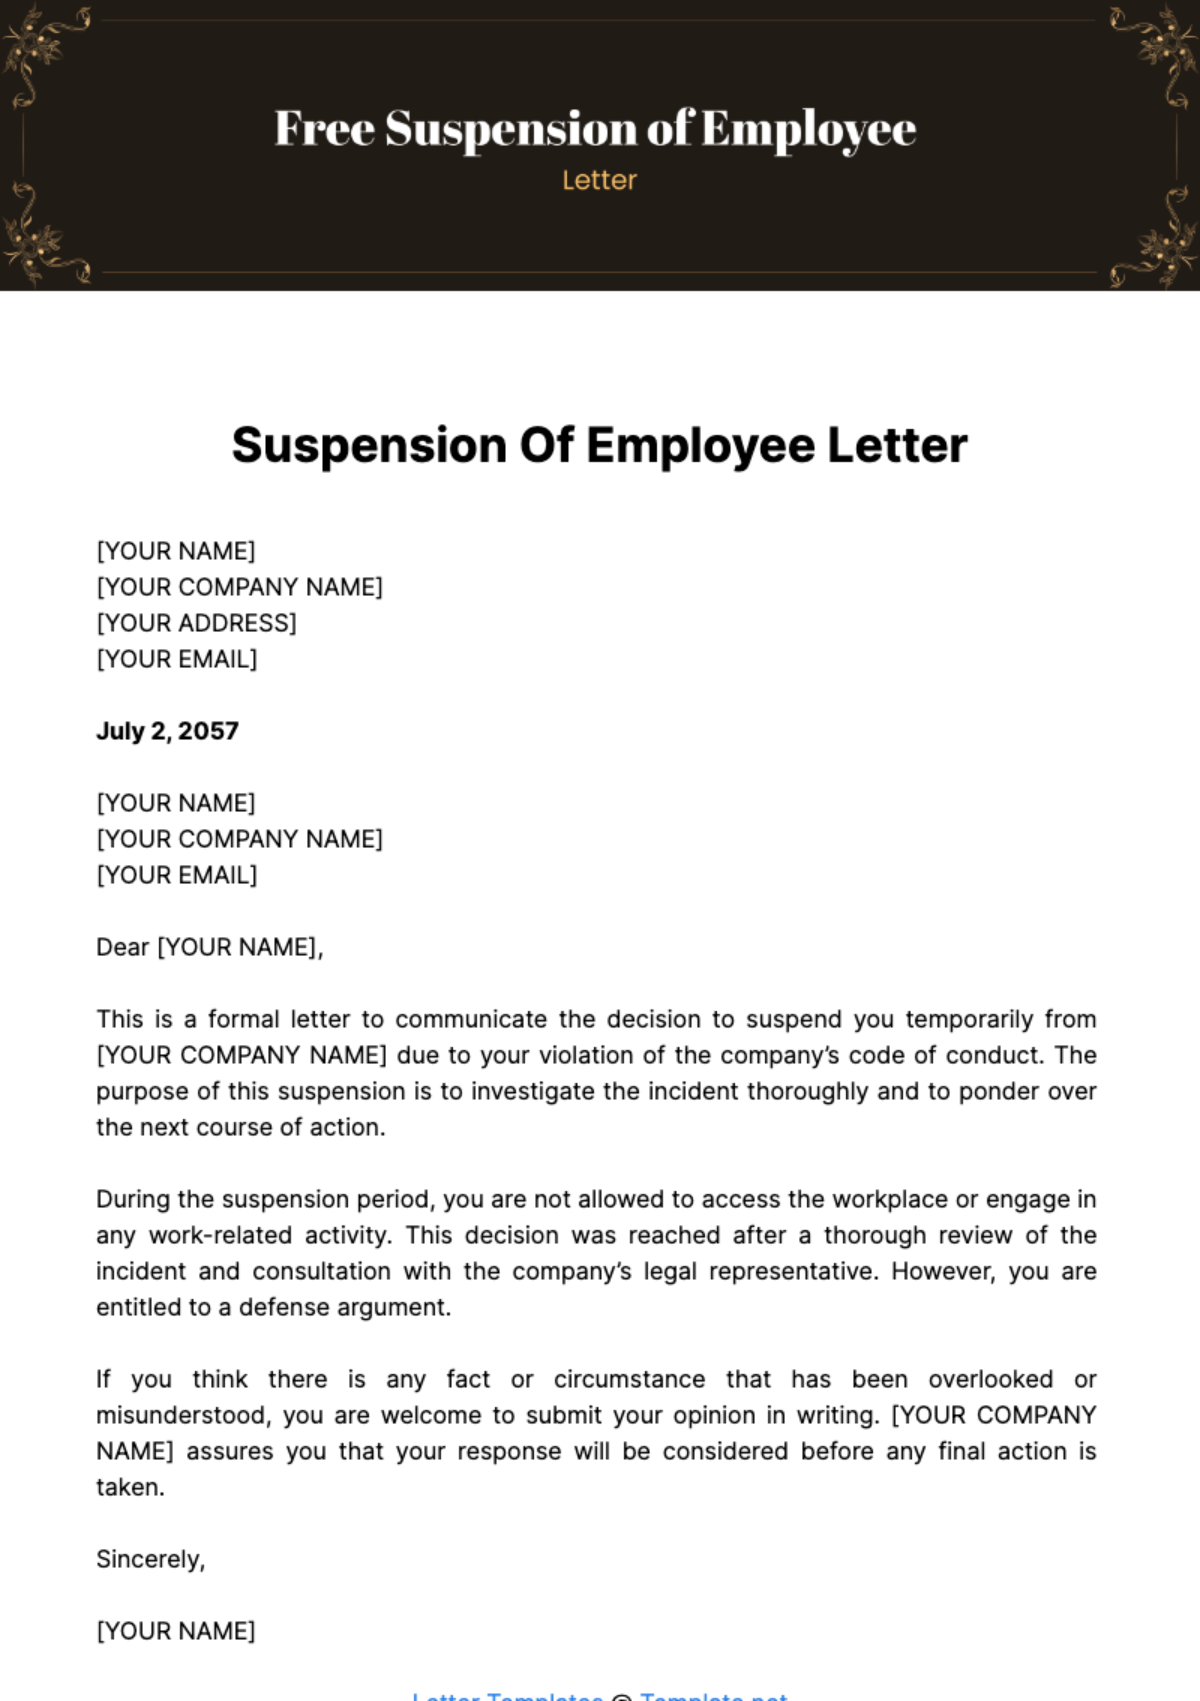 Suspension of Employee Letter Template